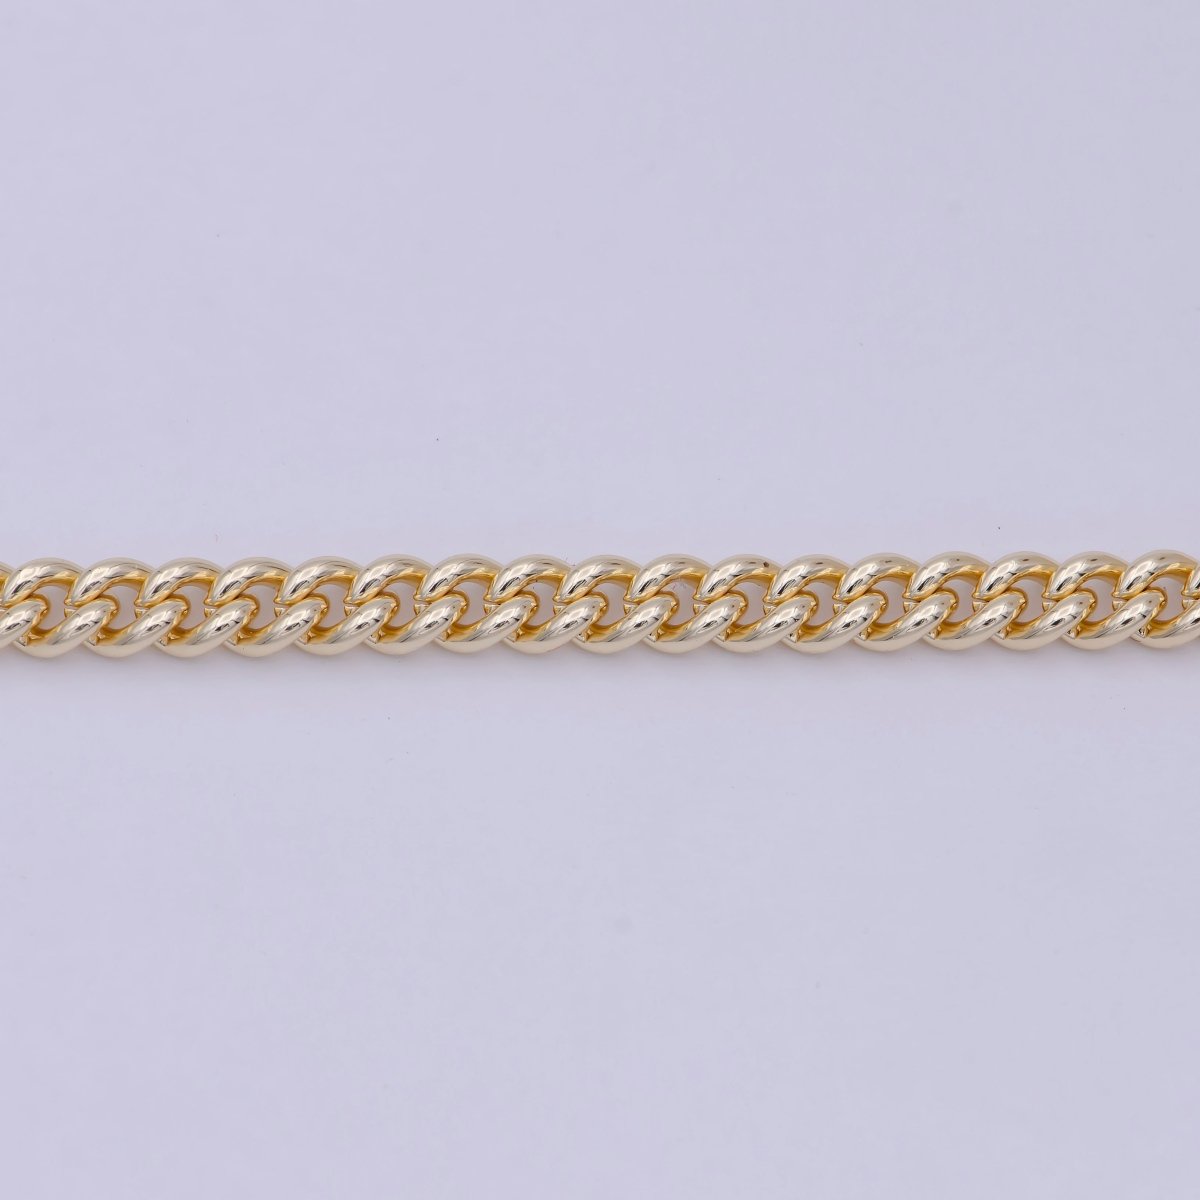 16K Gold Filled Cuban Curb Chain by Yard, Wholesale Bulk Roll Chain for Jewelry Making | ROLL-257 - DLUXCA